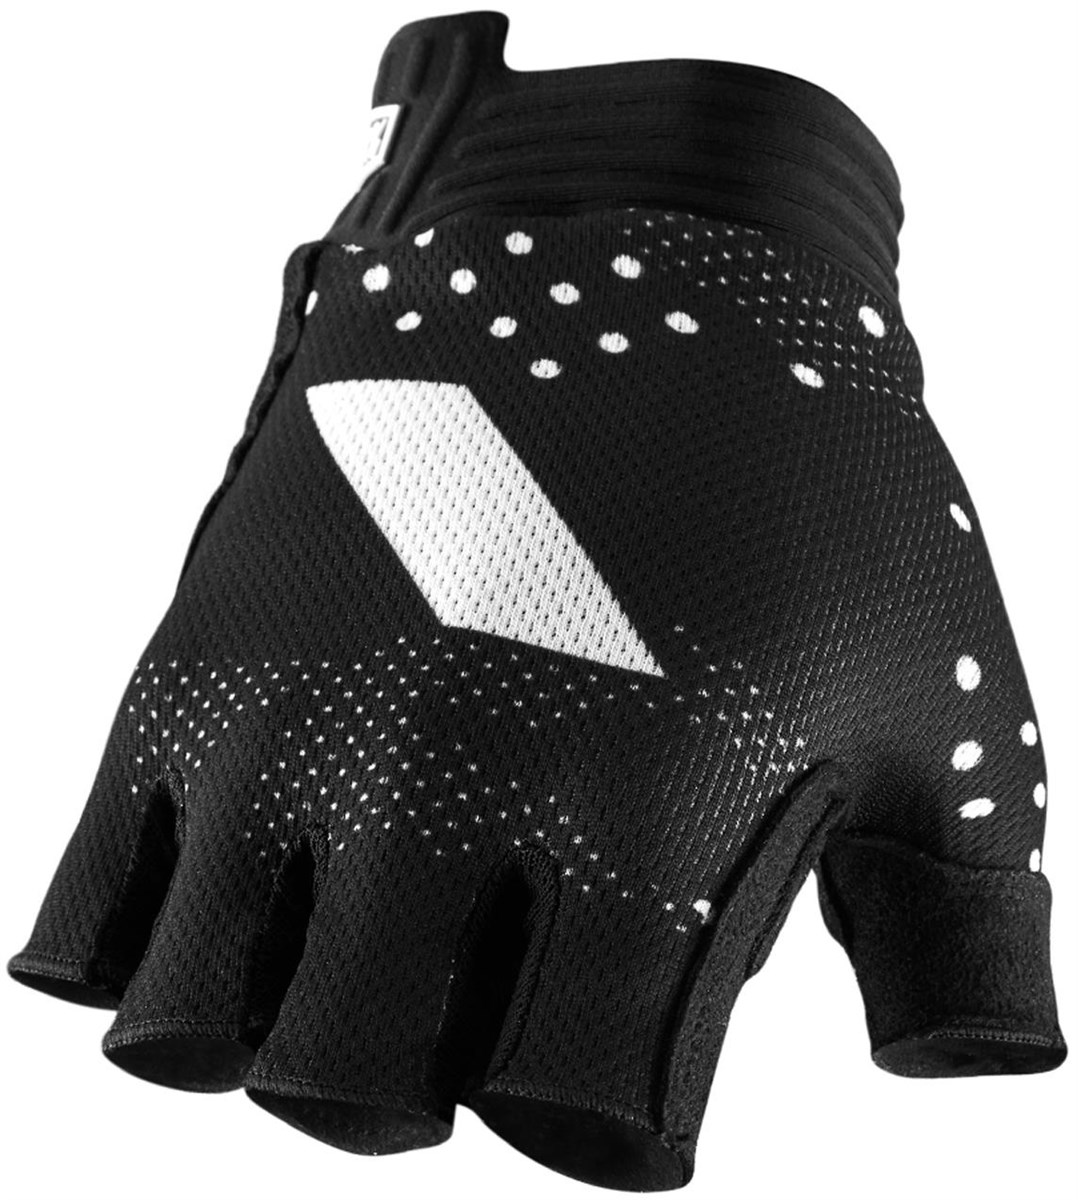 100% Exceeda Womens Short Finger Gloves product image